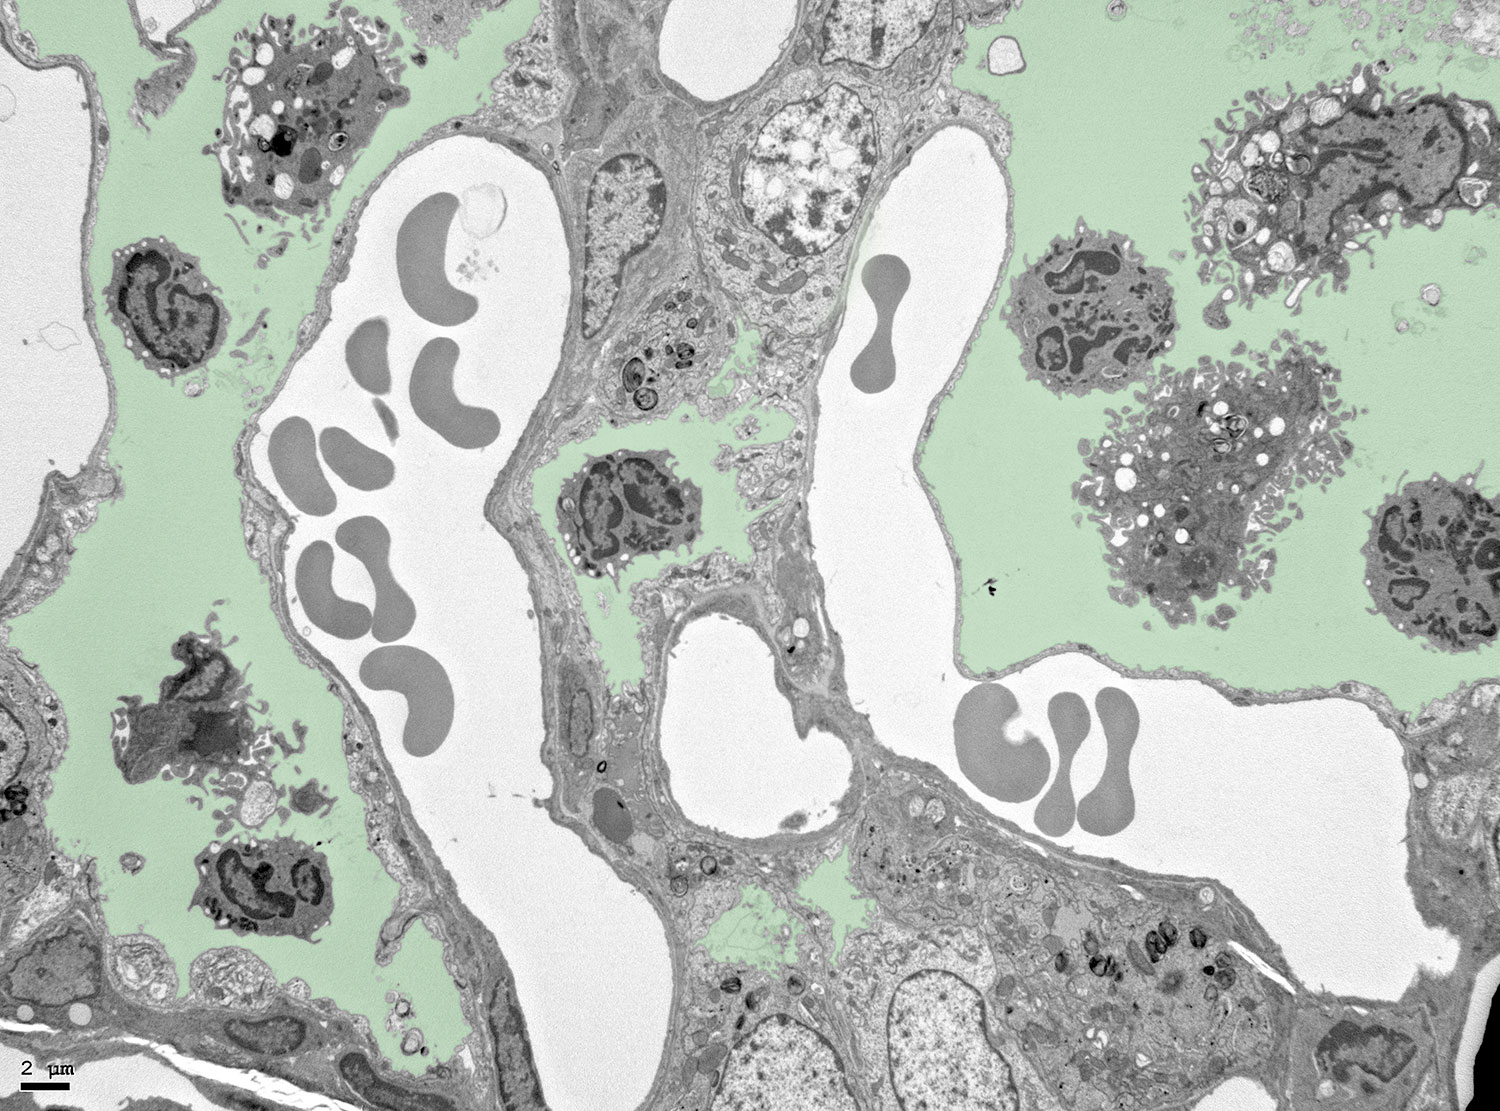 Electron microscopy imaging of the lung at day 5 after induction of HDM airway allergy, showing hypertrophic pneumocytes and leukocytes in the alveolar space, coloured in light green (Feo-Lucas et al., Frontiers in Immunology 2023).